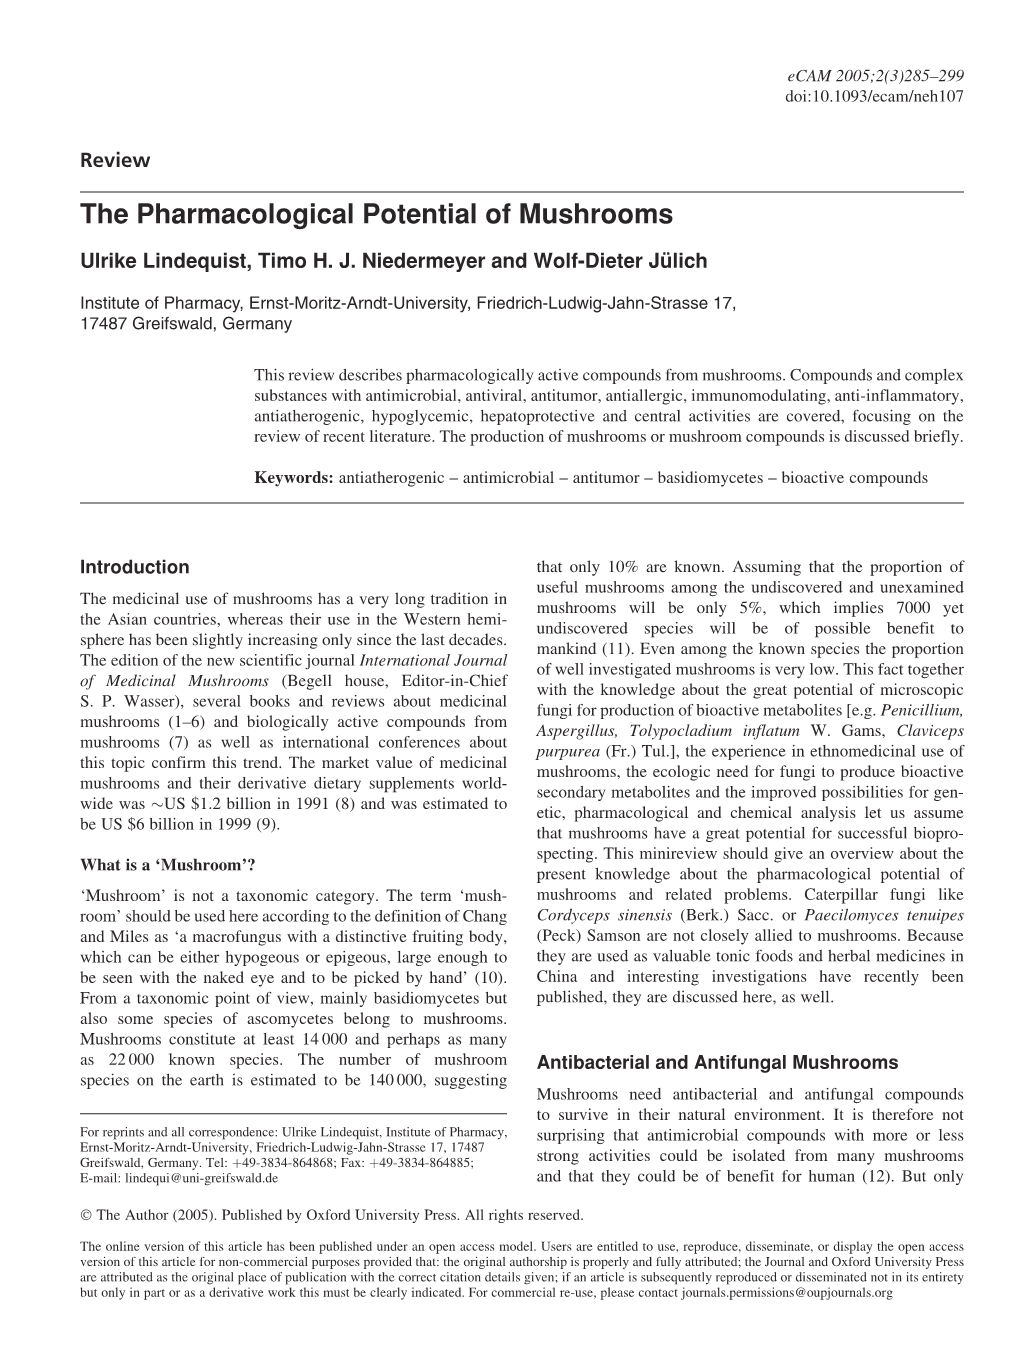 The Pharmacological Potential of Mushrooms